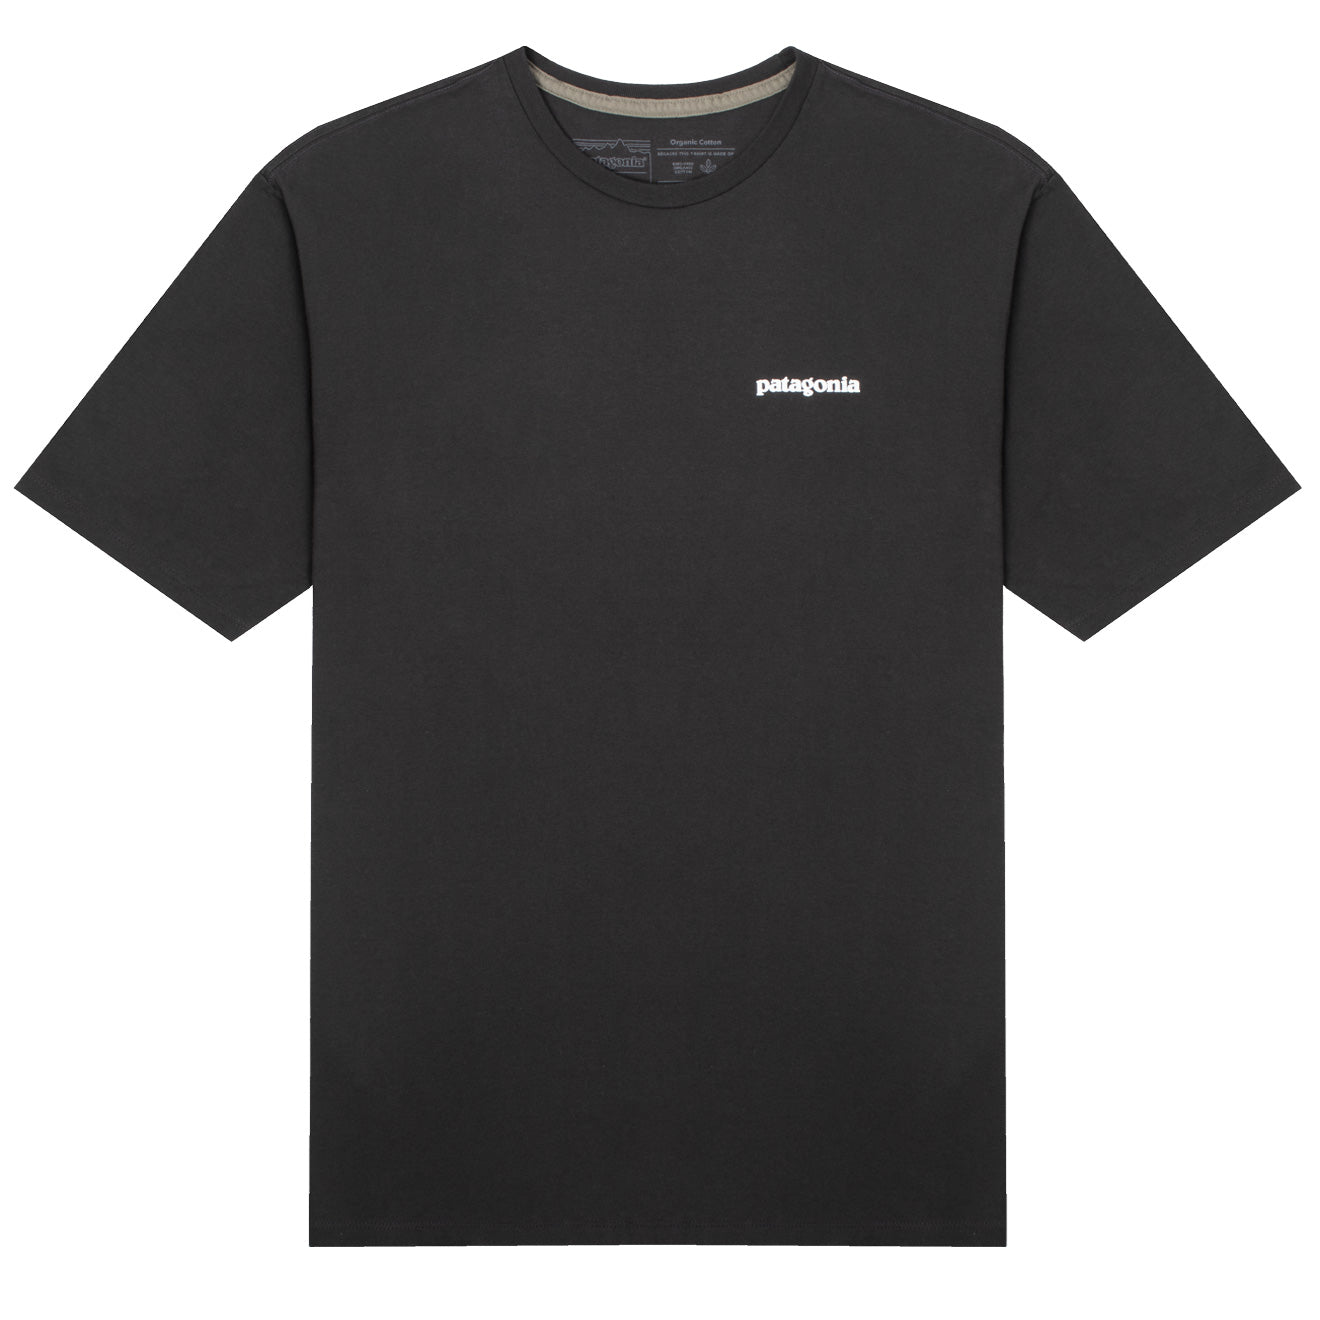 Patagonia Home Water Trout Organic T-Shirt Ink Black | The Sporting Lodge